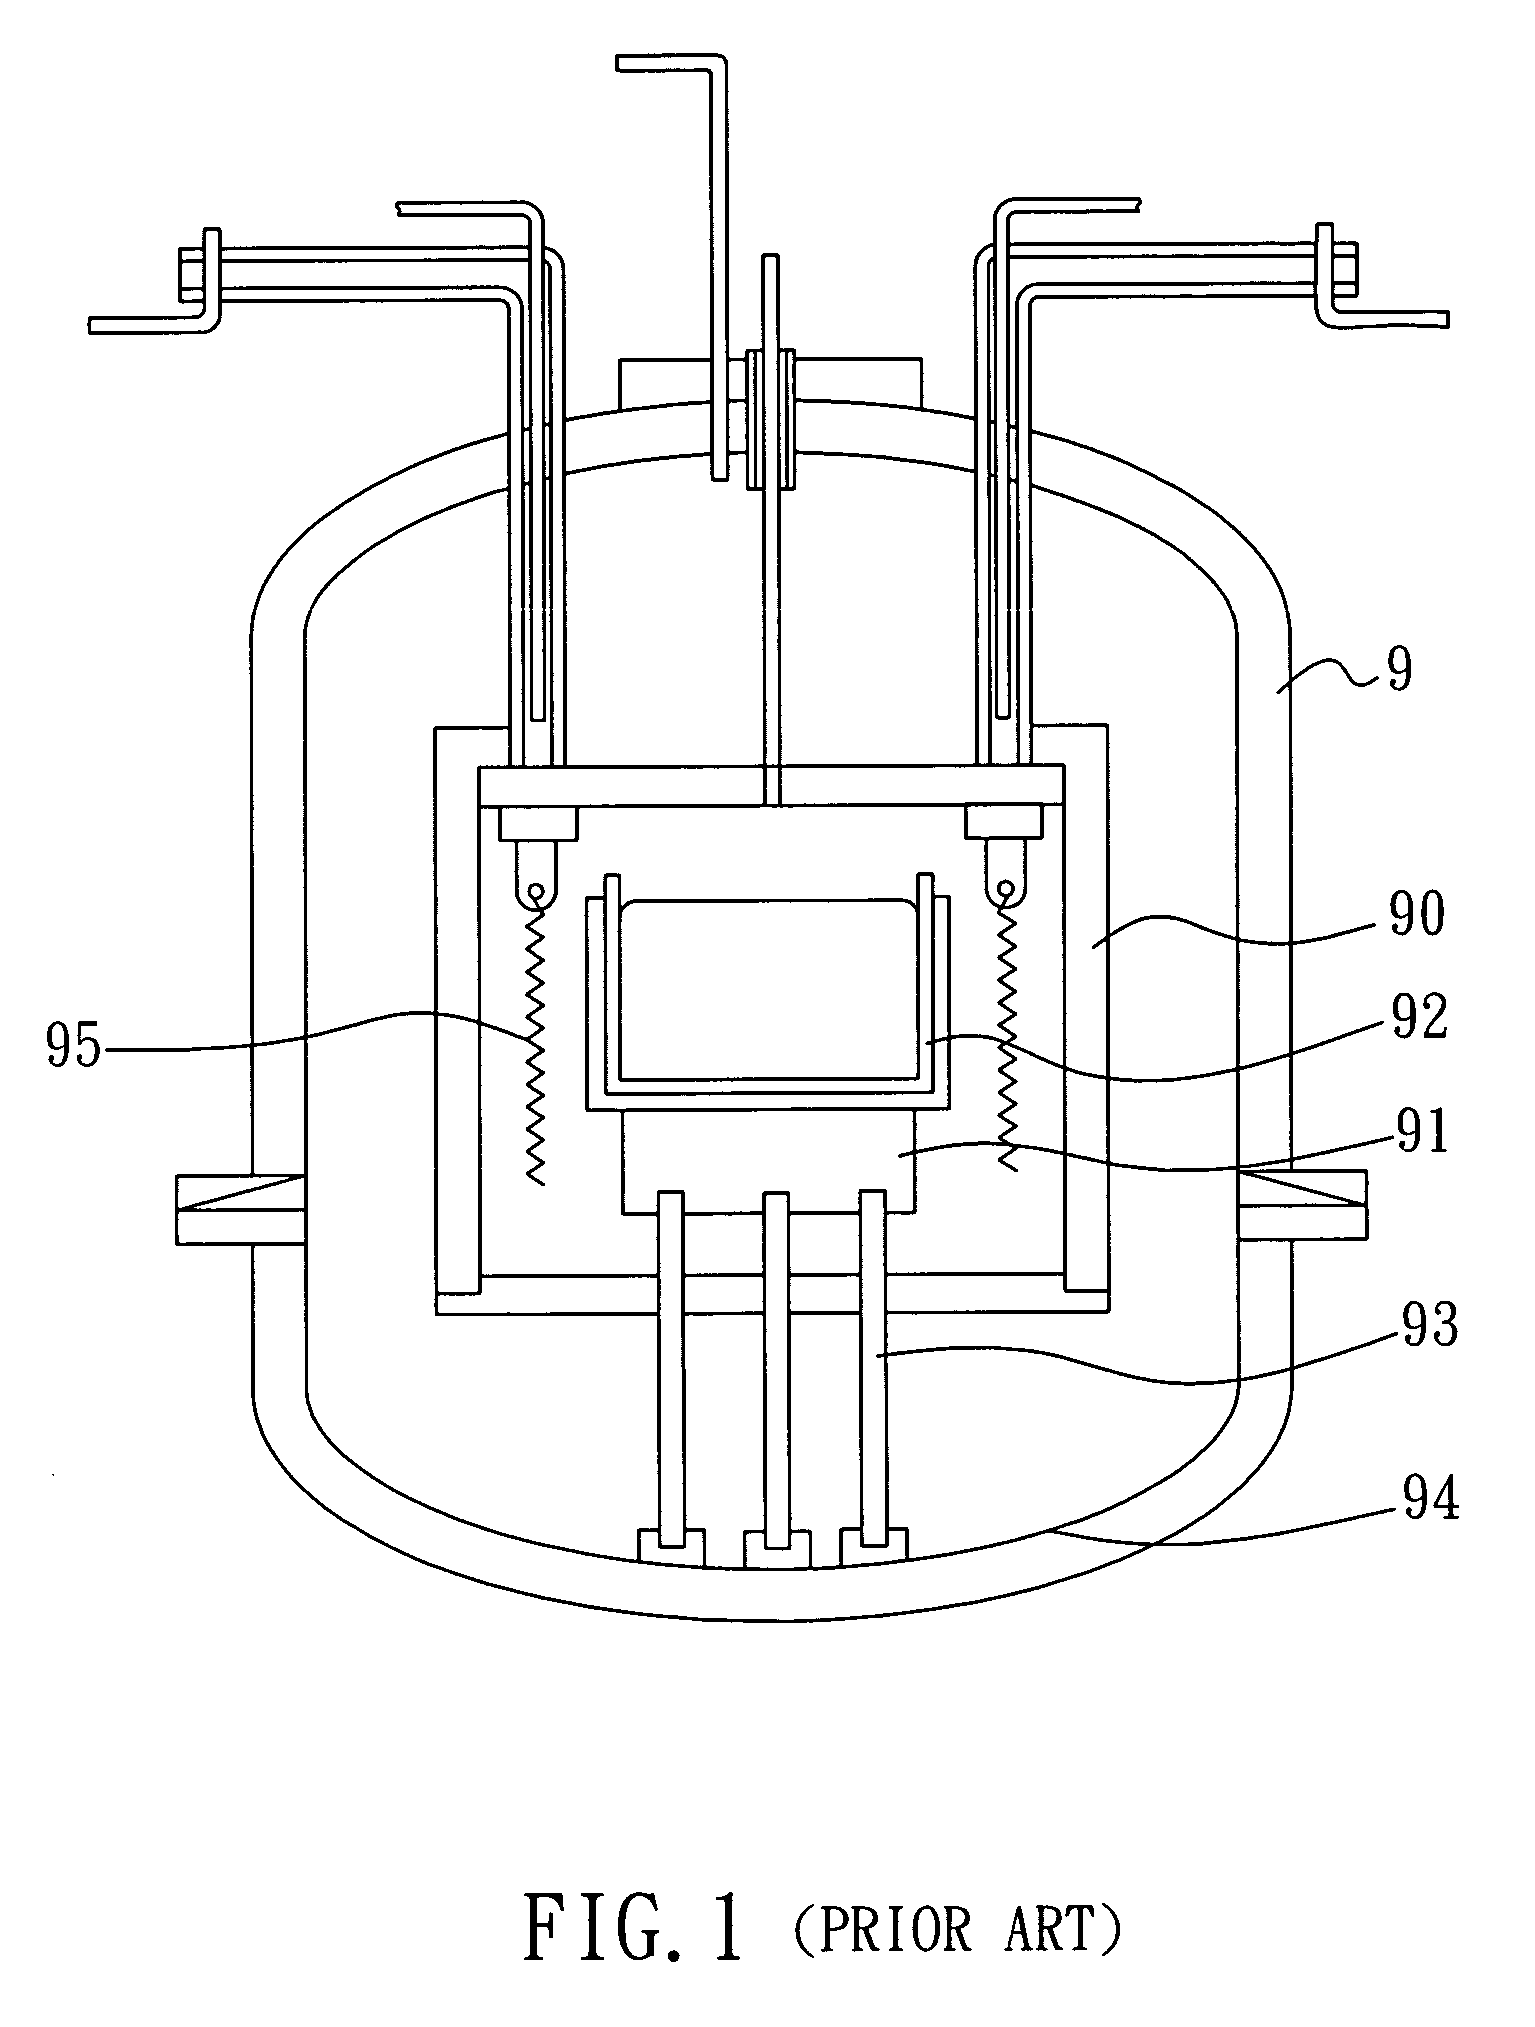 Supporting table having heaters inside crystal-growing furnace